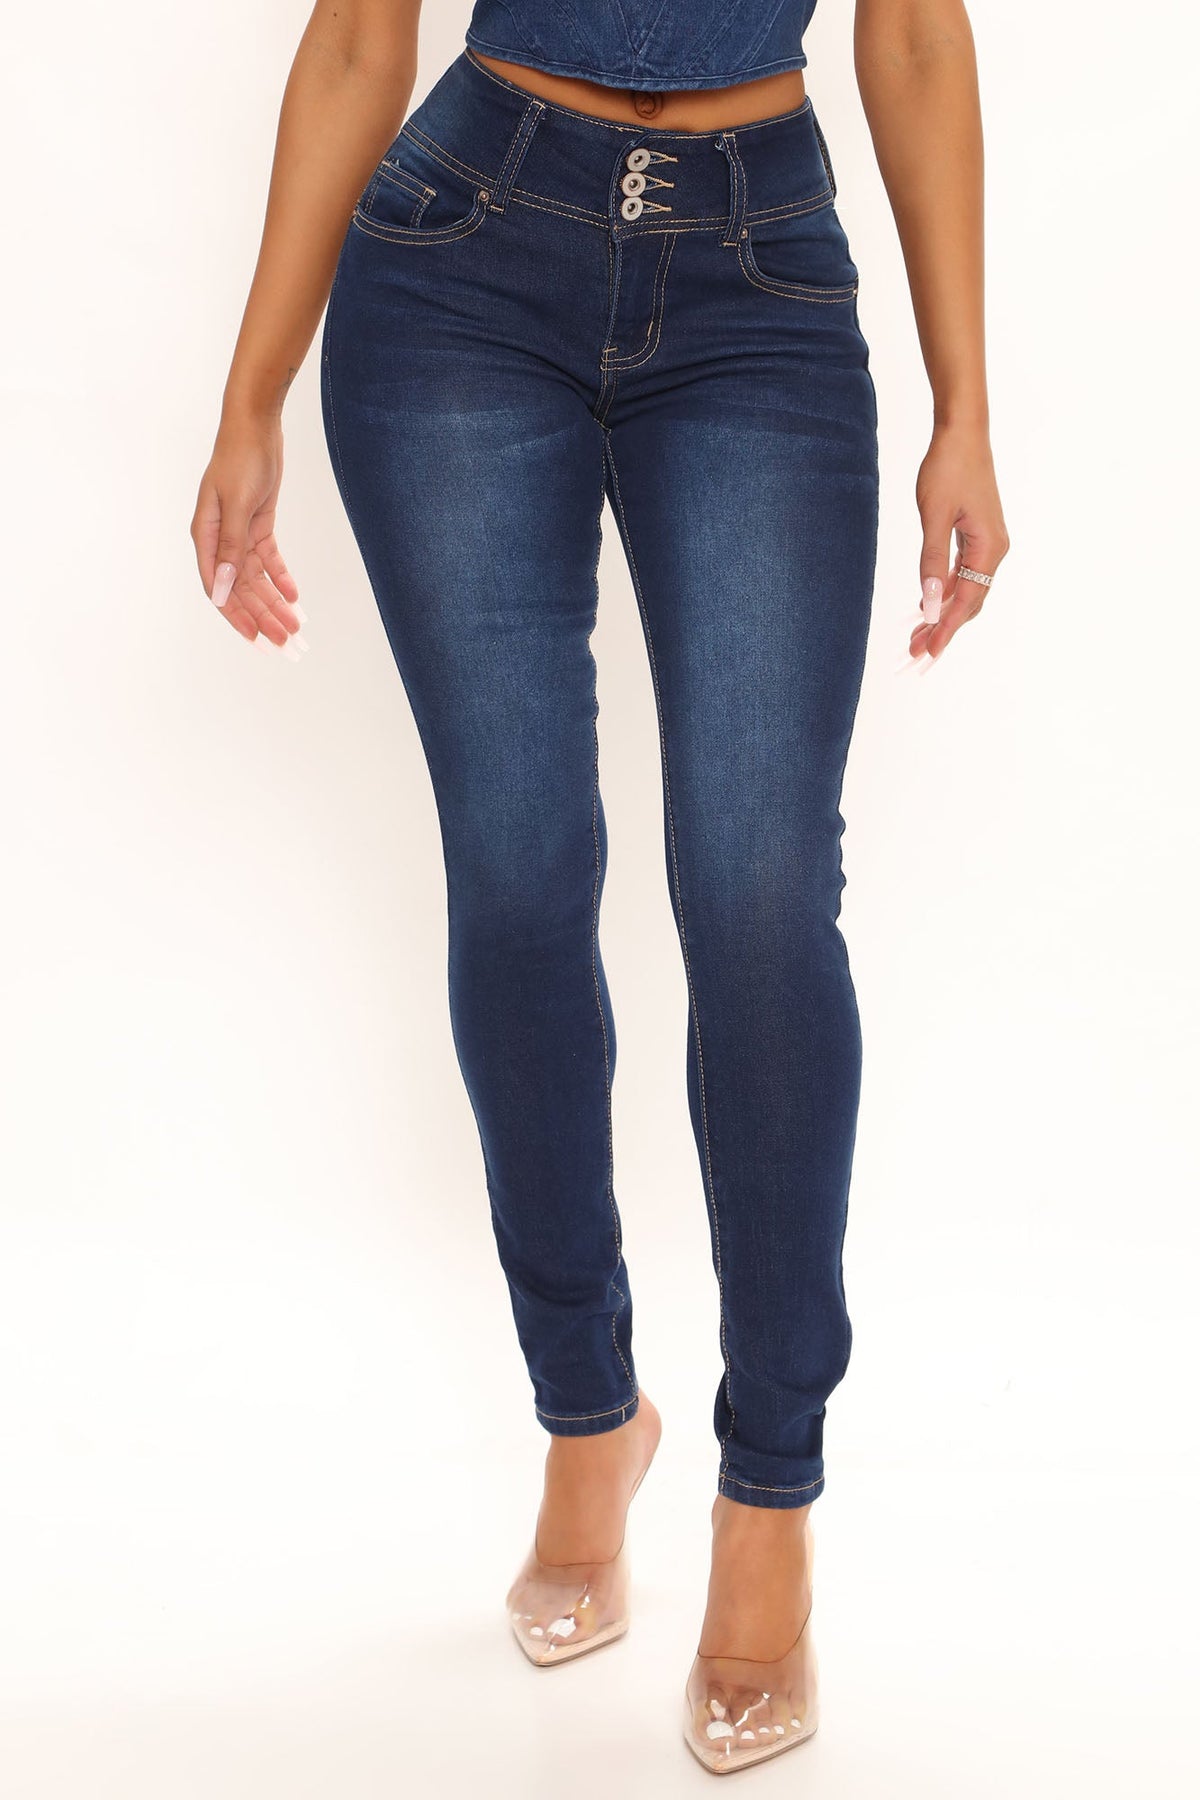 All The Moves Booty Shaping Skinny Jeans - Dark Wash